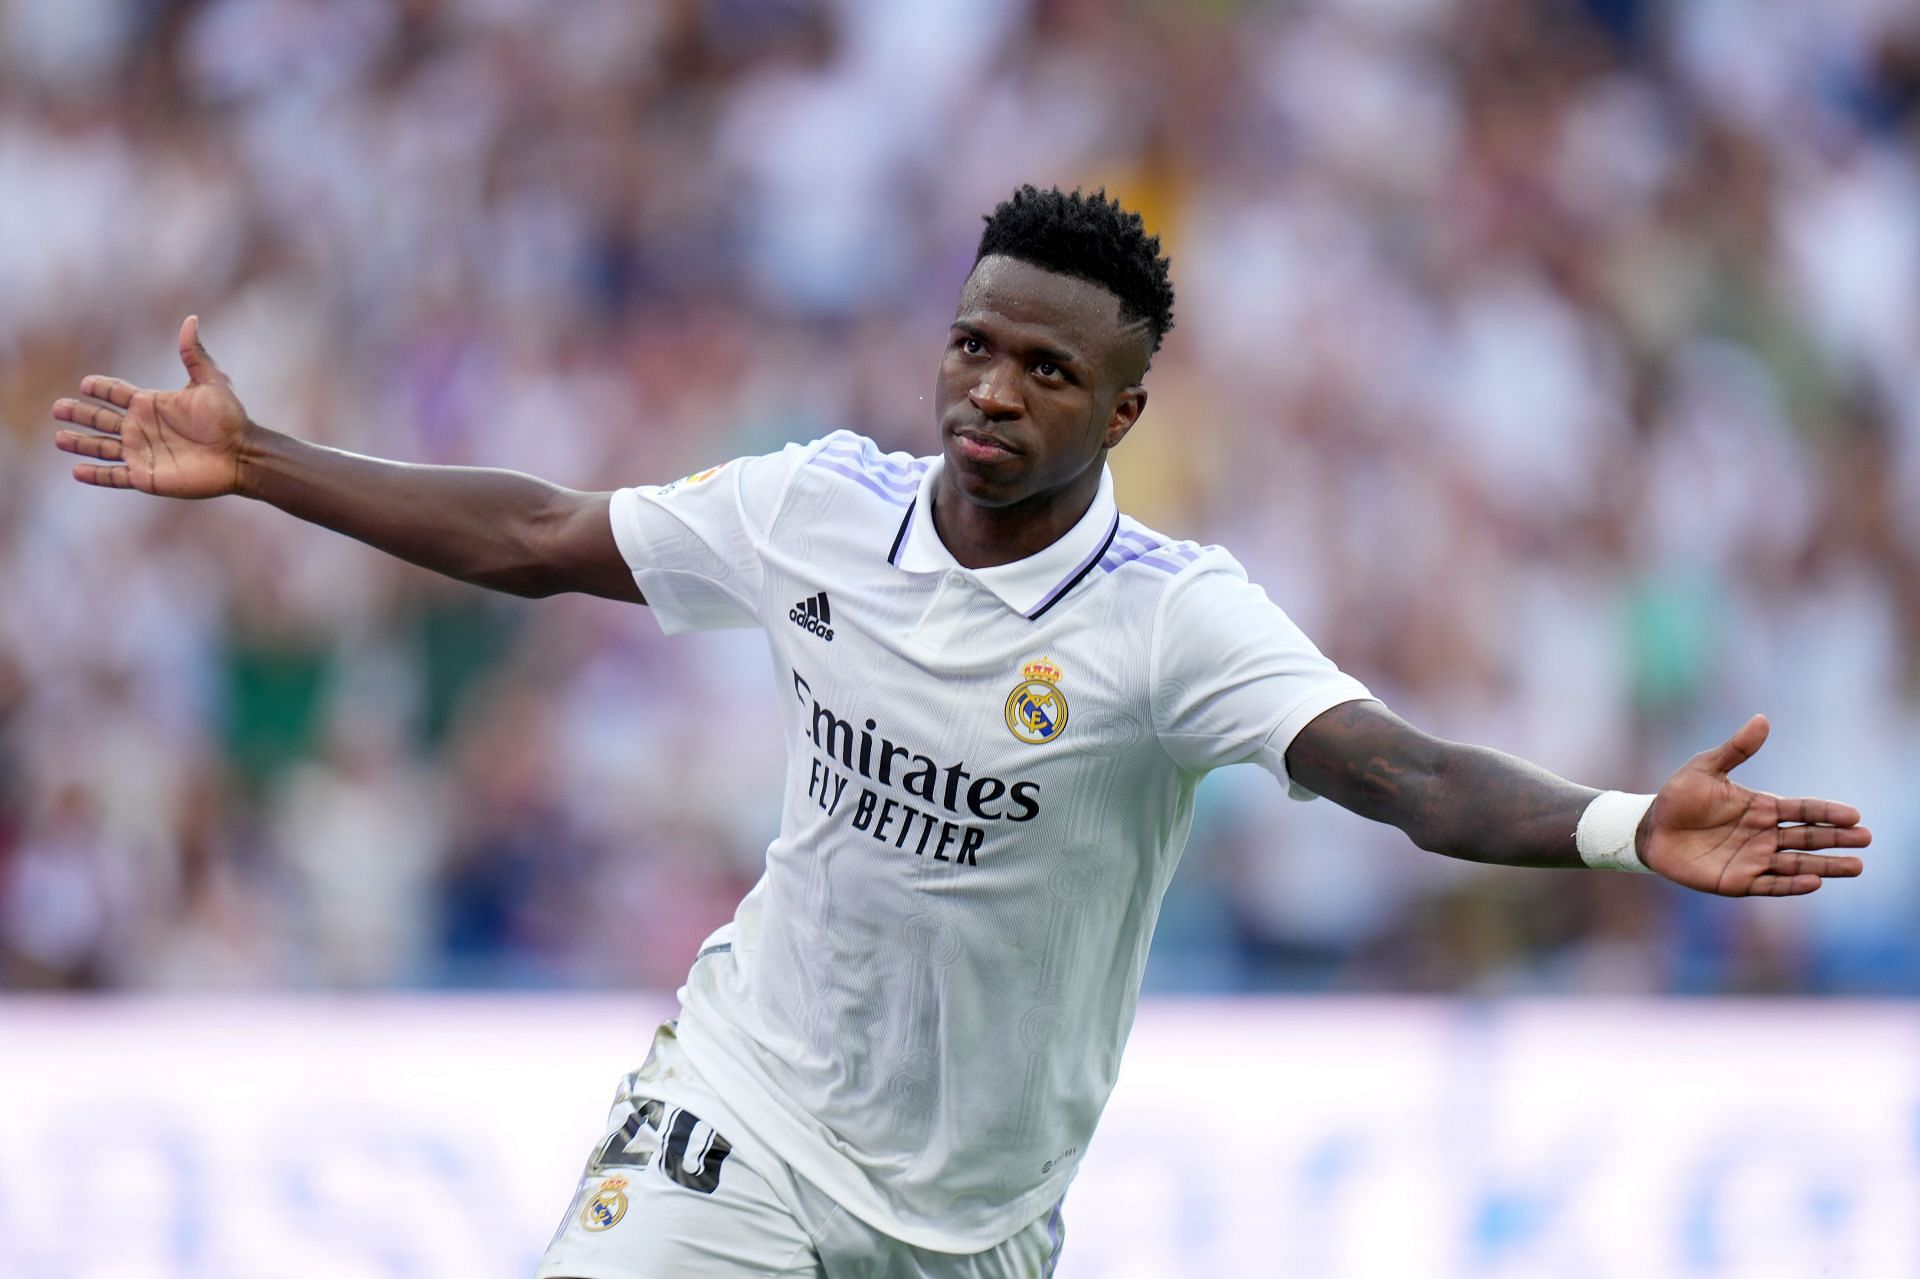 Vinicius has been in great from for Real Madrid this season